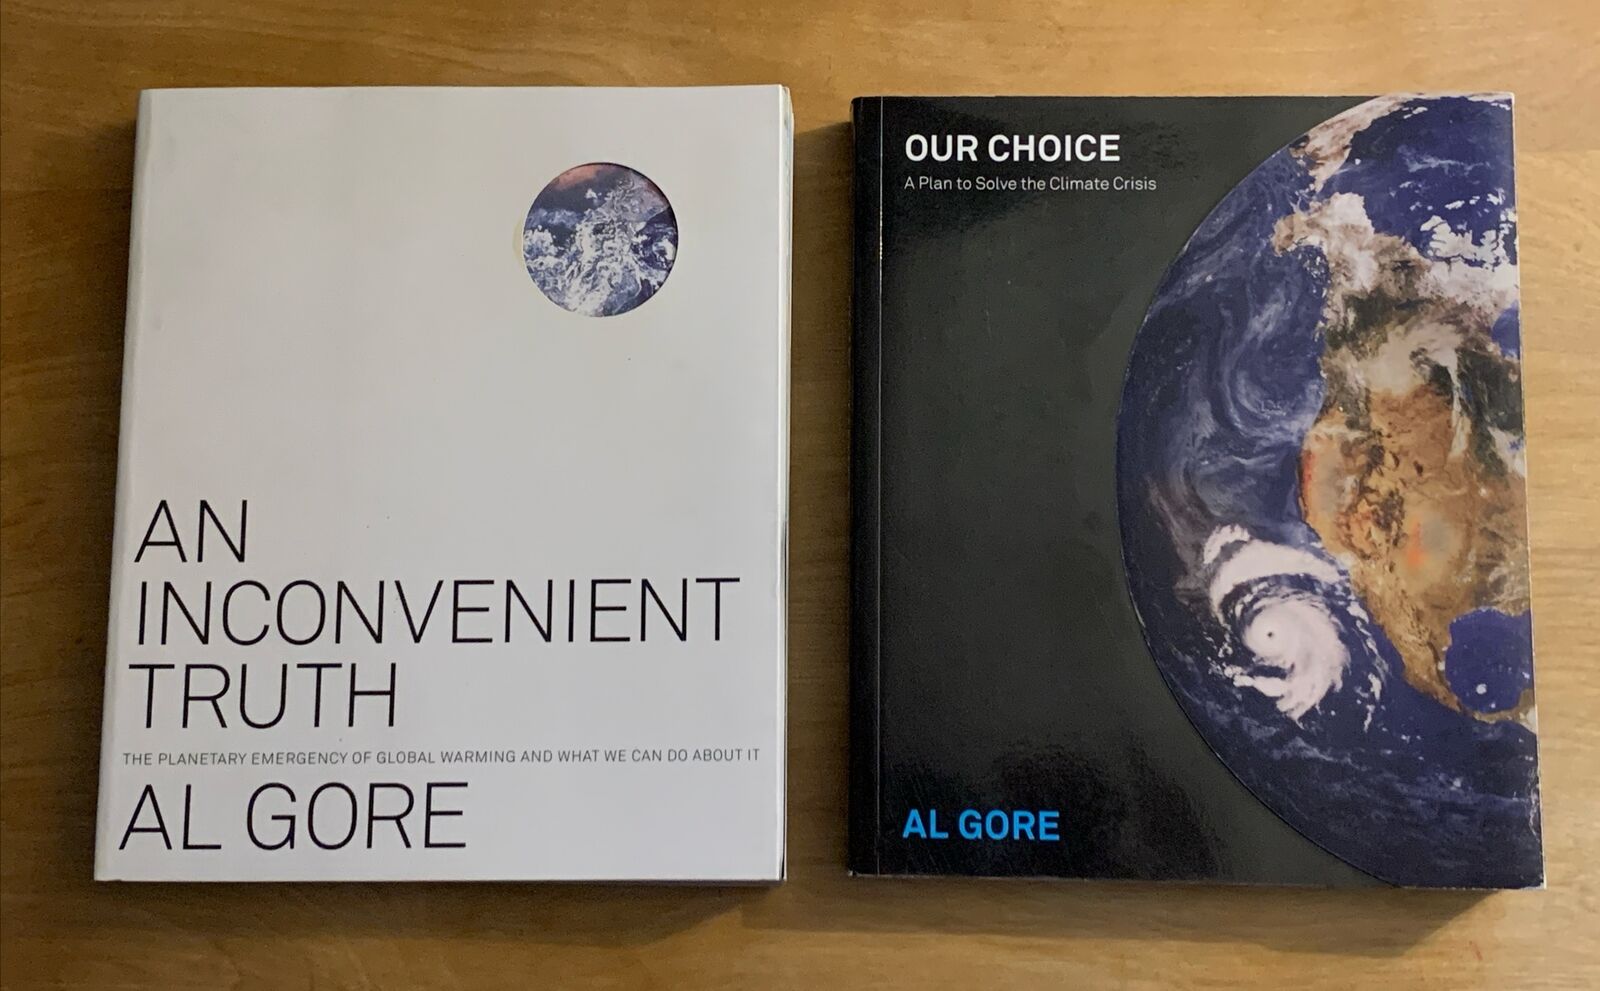 Lot Of 2 Books by Al Gore - Inconvenient Truth and Our Choice - NEW